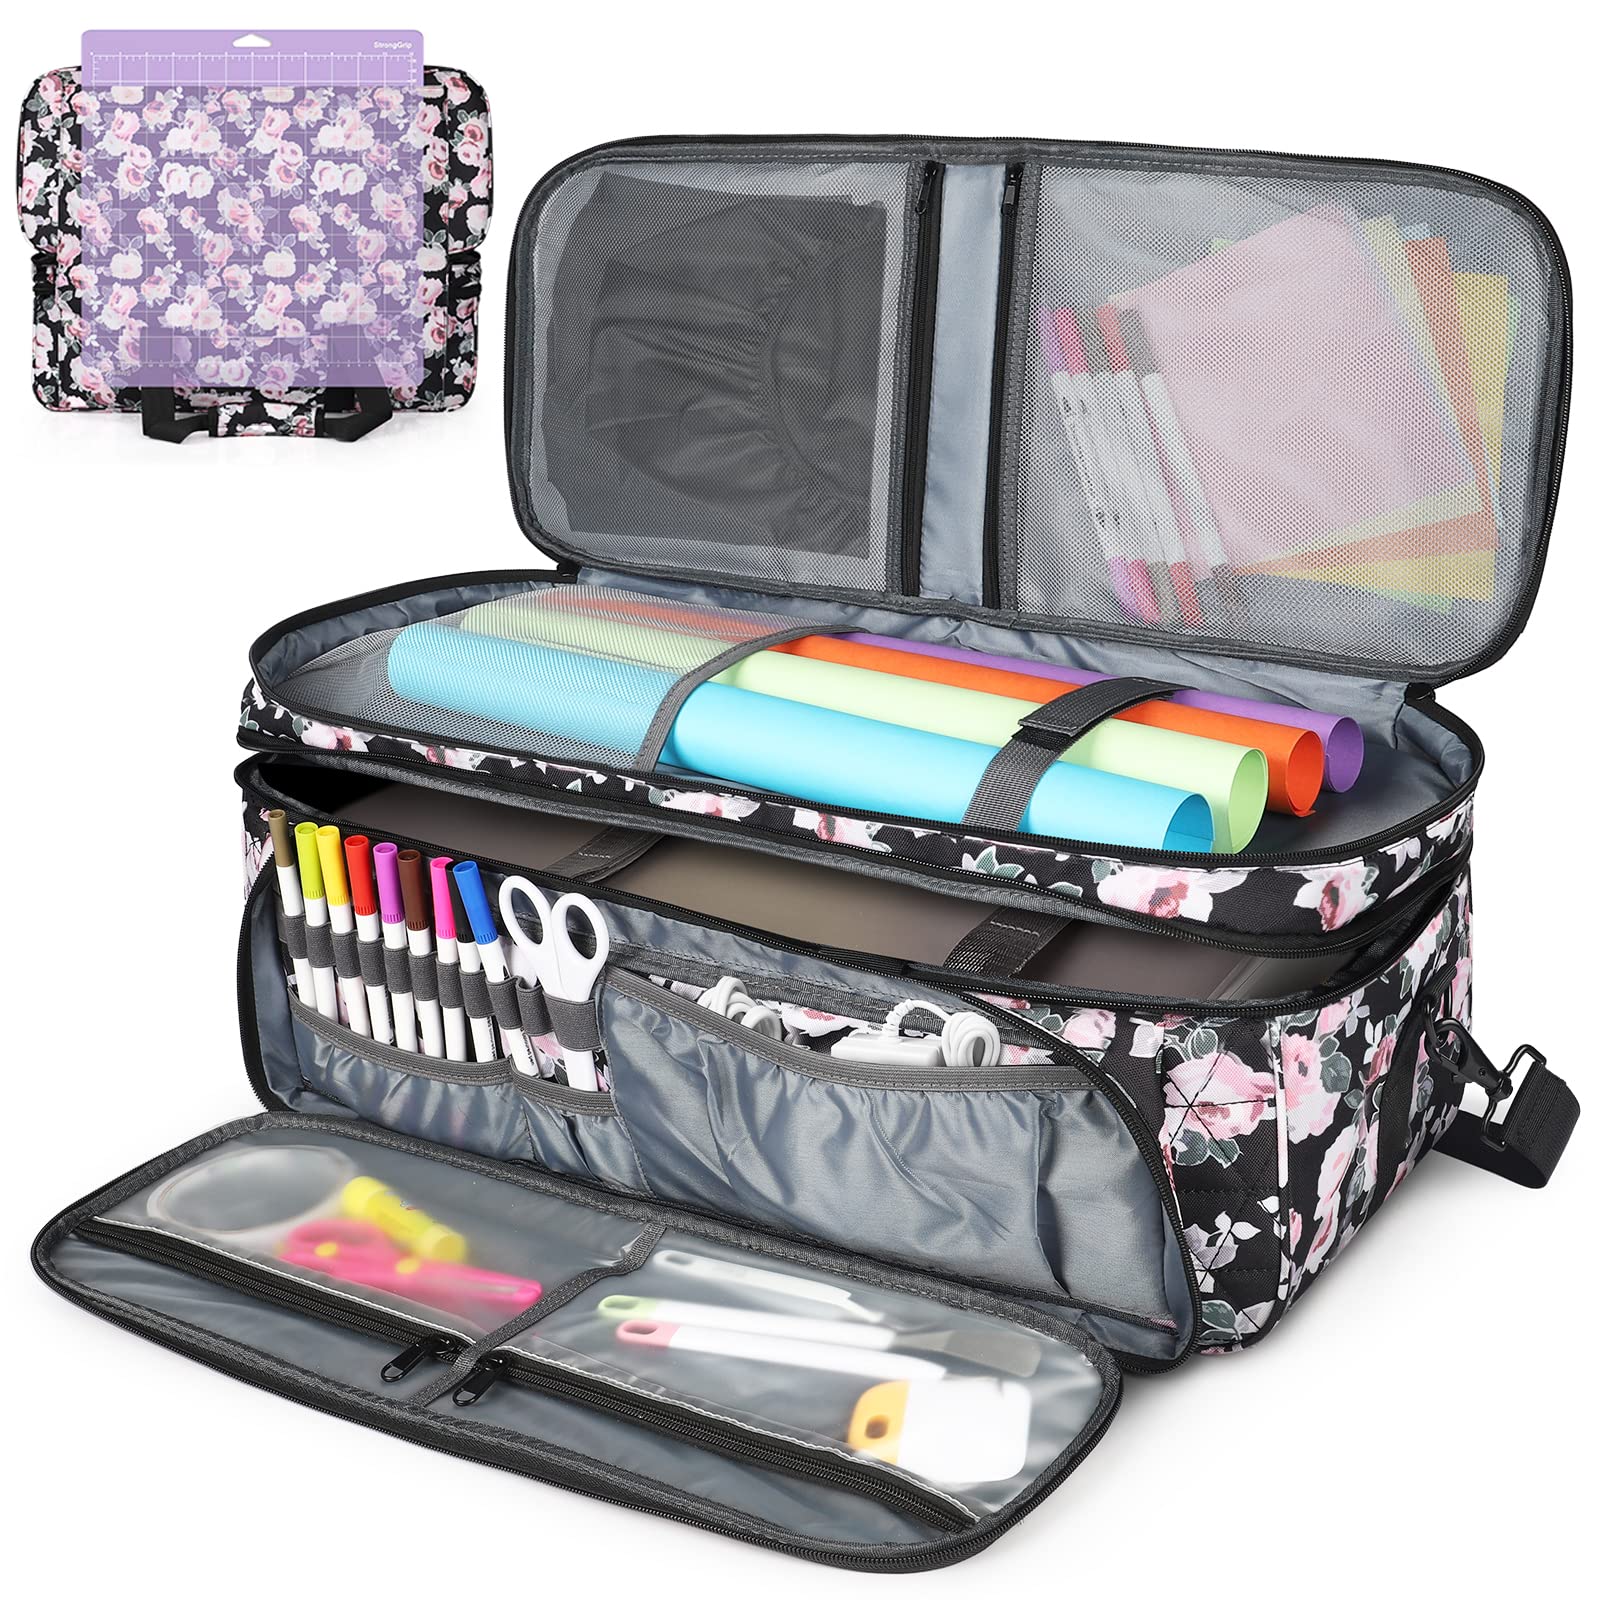 Bettukini Double-Layer Carrying Case For Cricut Maker, Maker 3, Explore  Air, Air 2, Silhouette Cameo 4 And Accessories, Water-Re